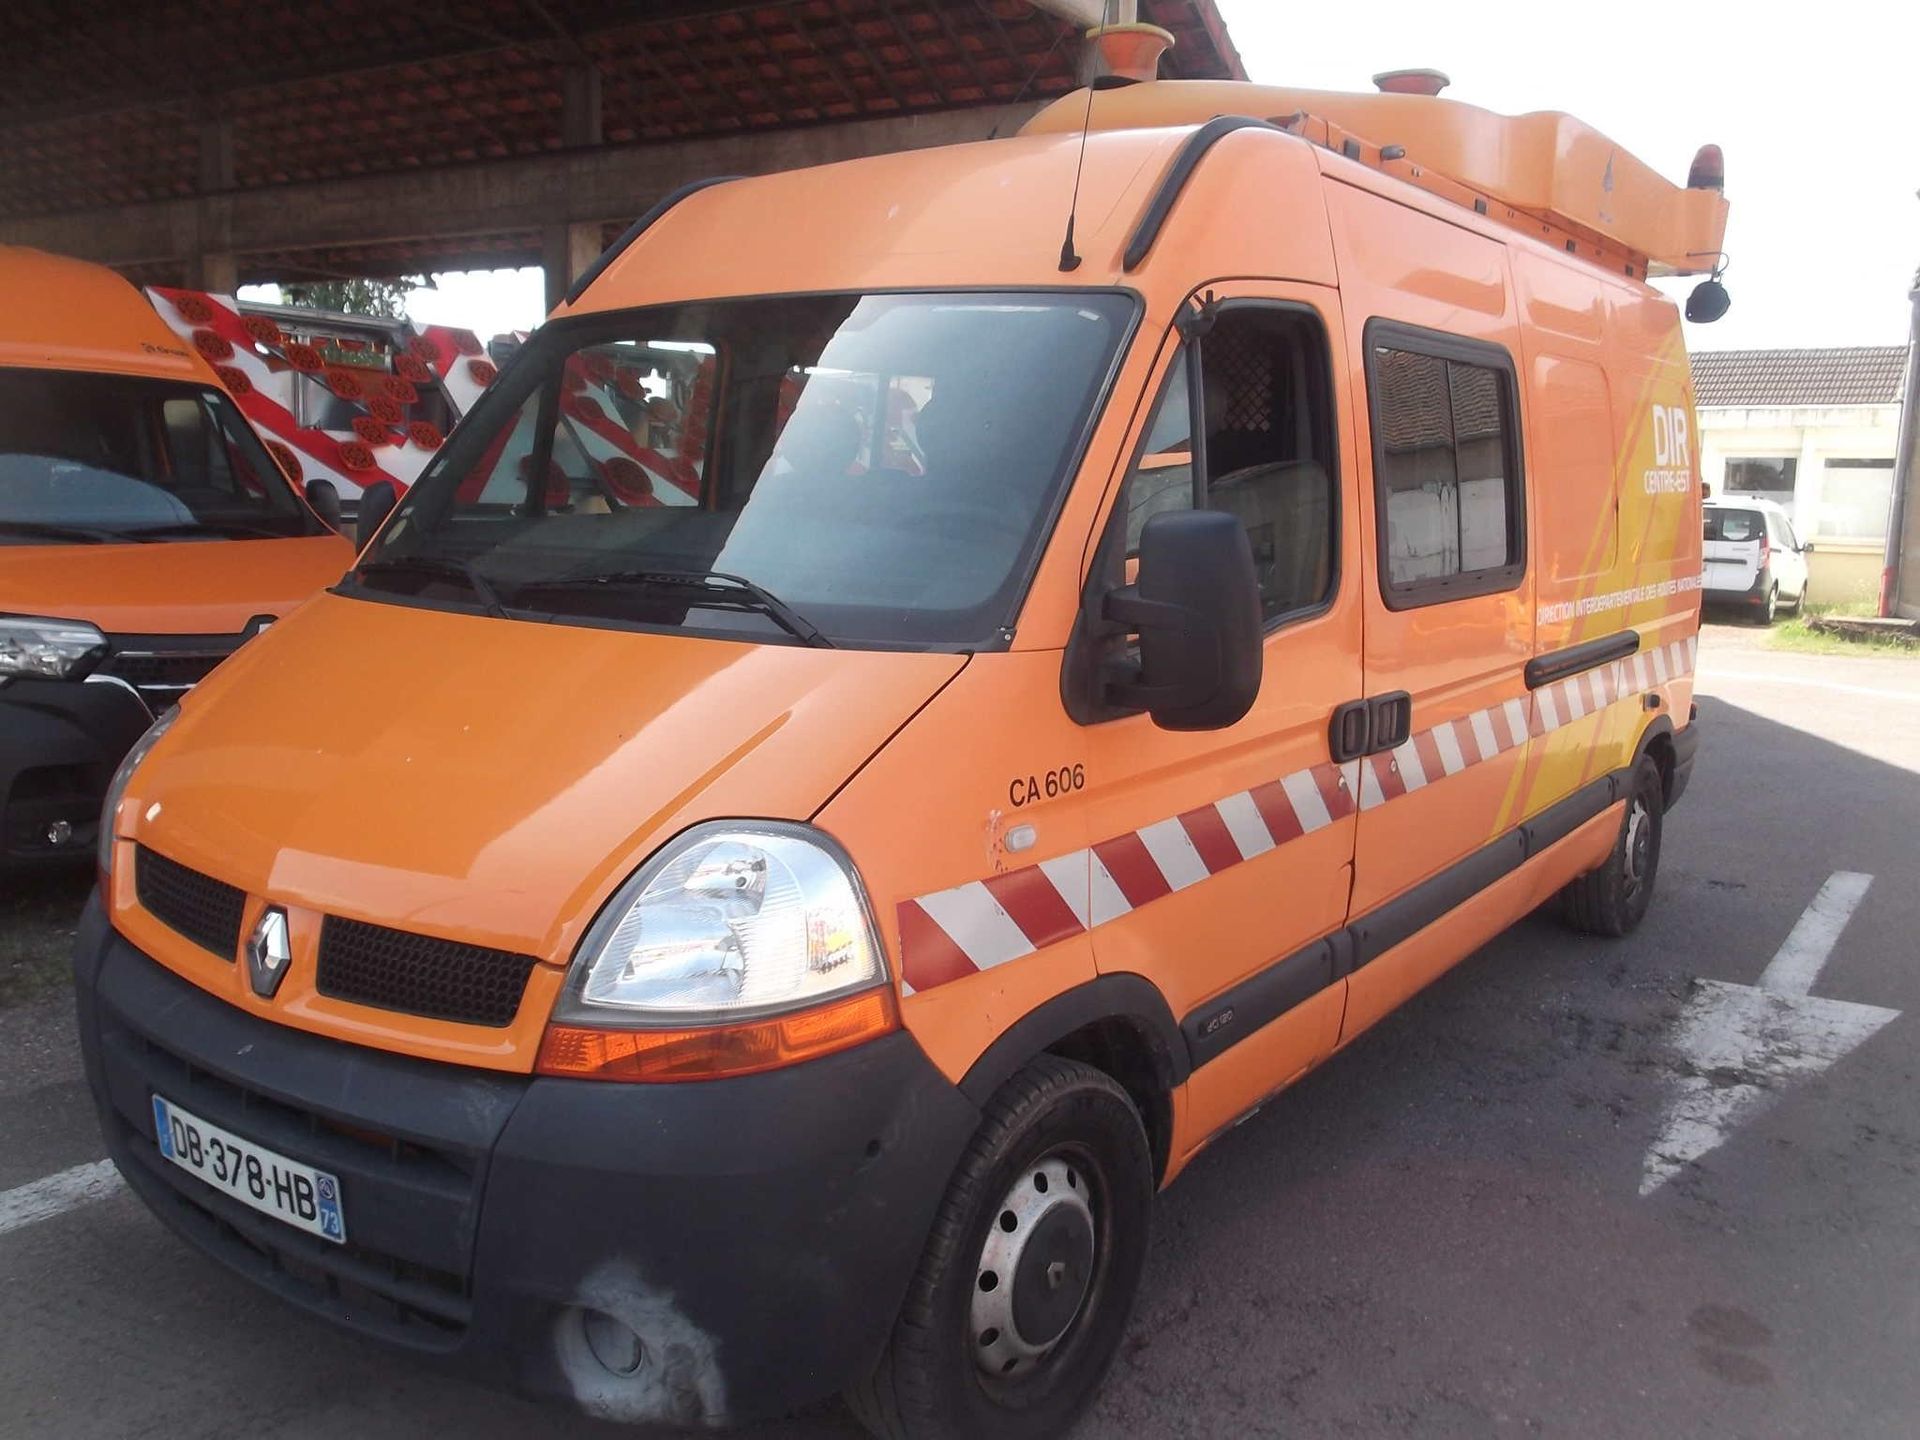 Null [RP] Reserved for Professionals
RENAULT Master DCI120 Gazole, imm. DB-378-H&hellip;